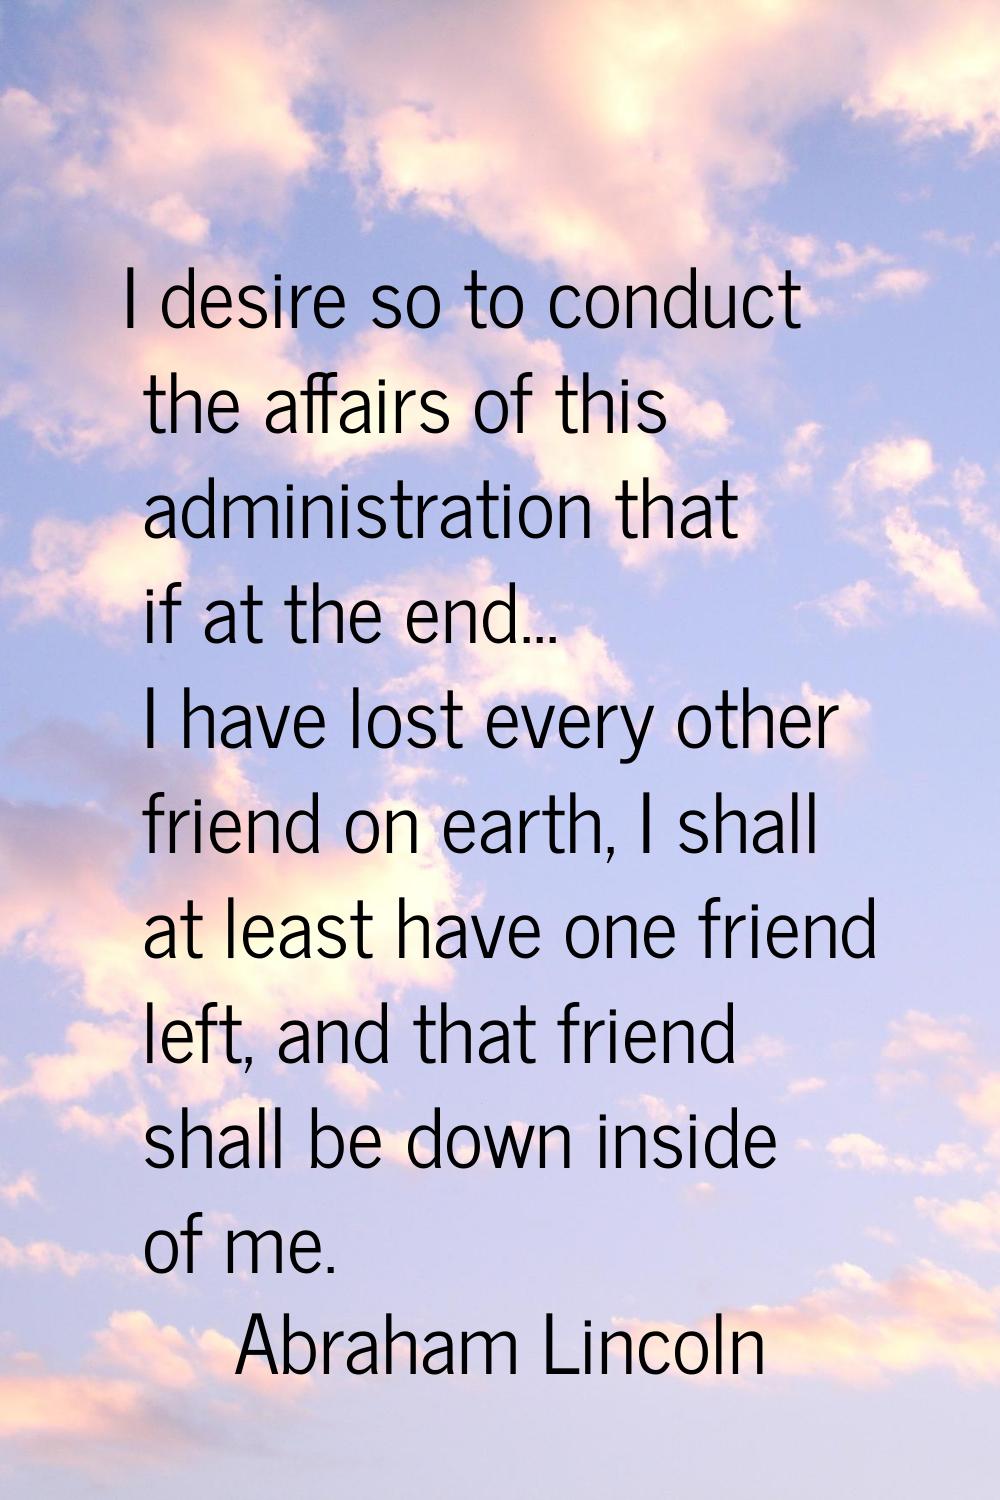 I desire so to conduct the affairs of this administration that if at the end... I have lost every o